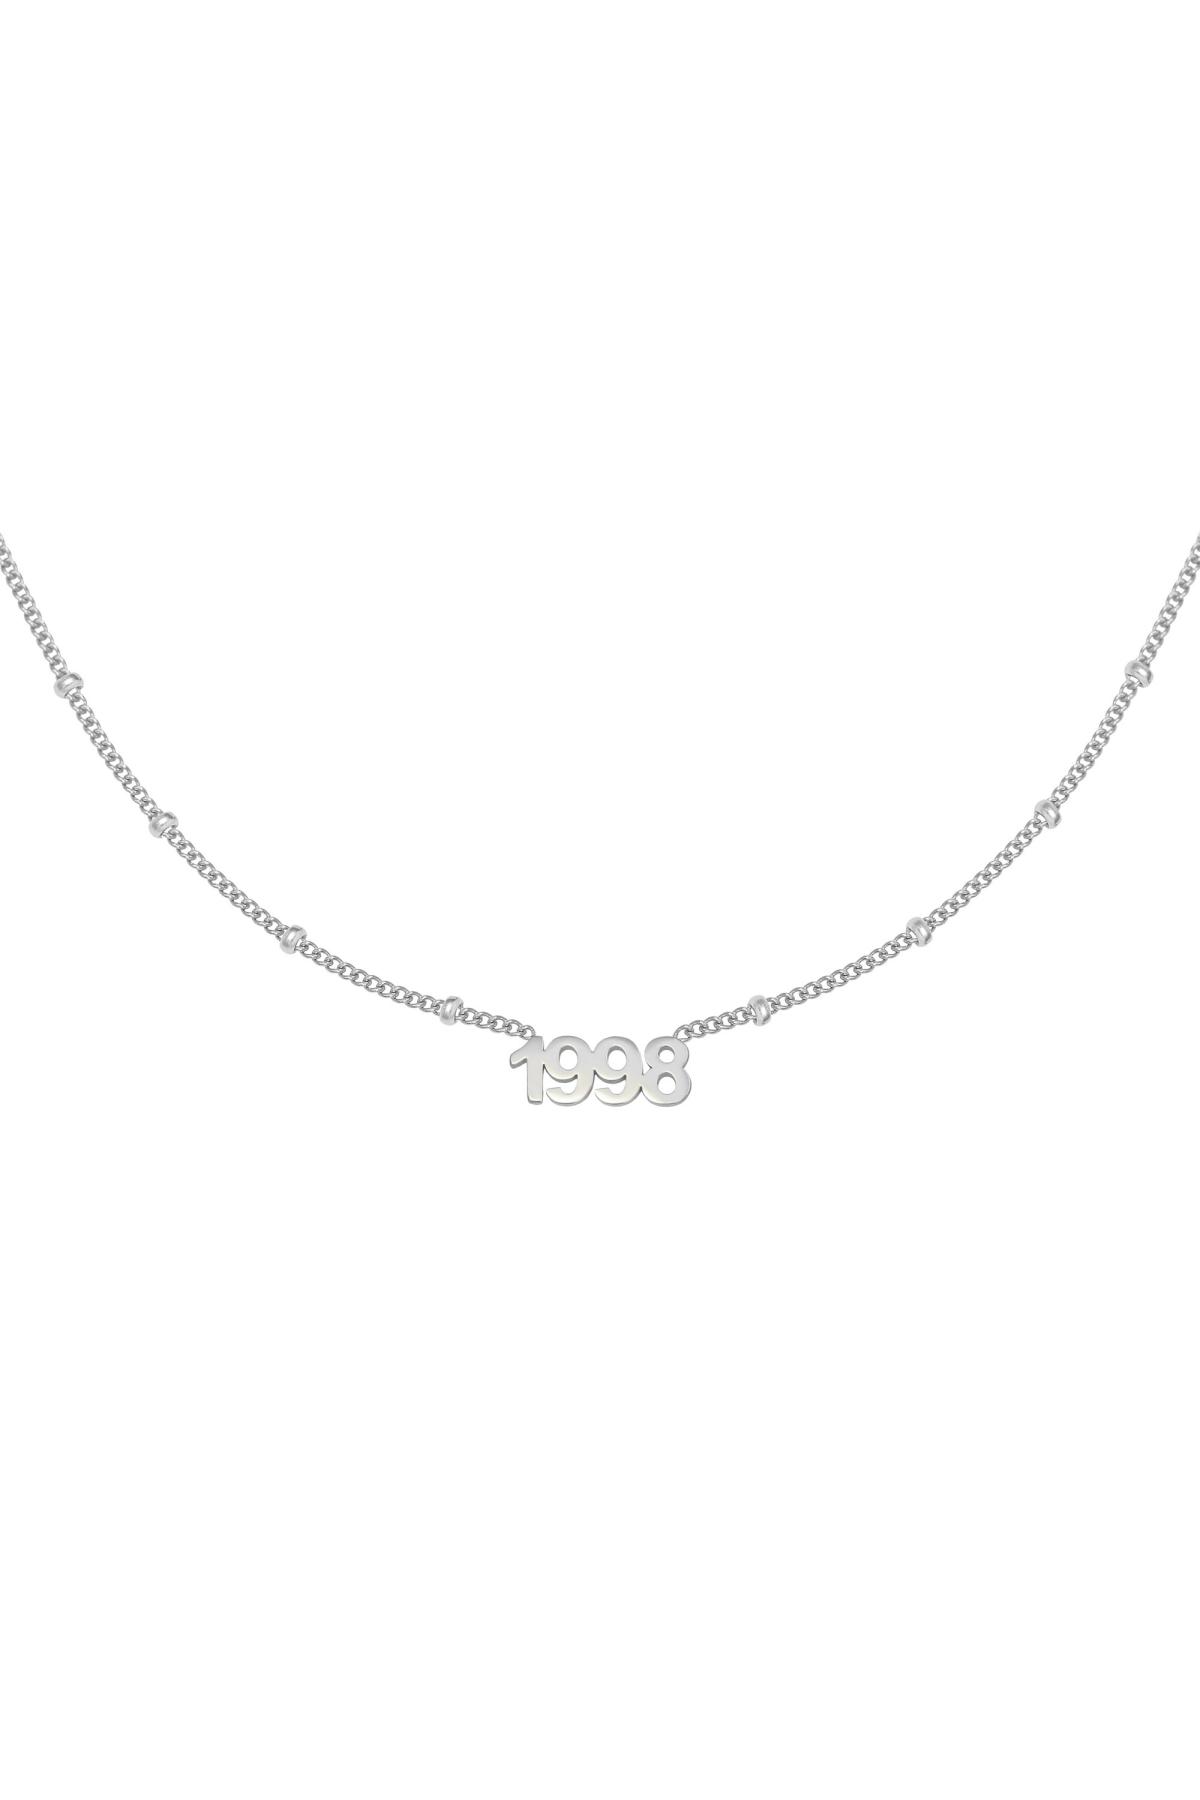 Necklace Year 1998 Silver Stainless Steel